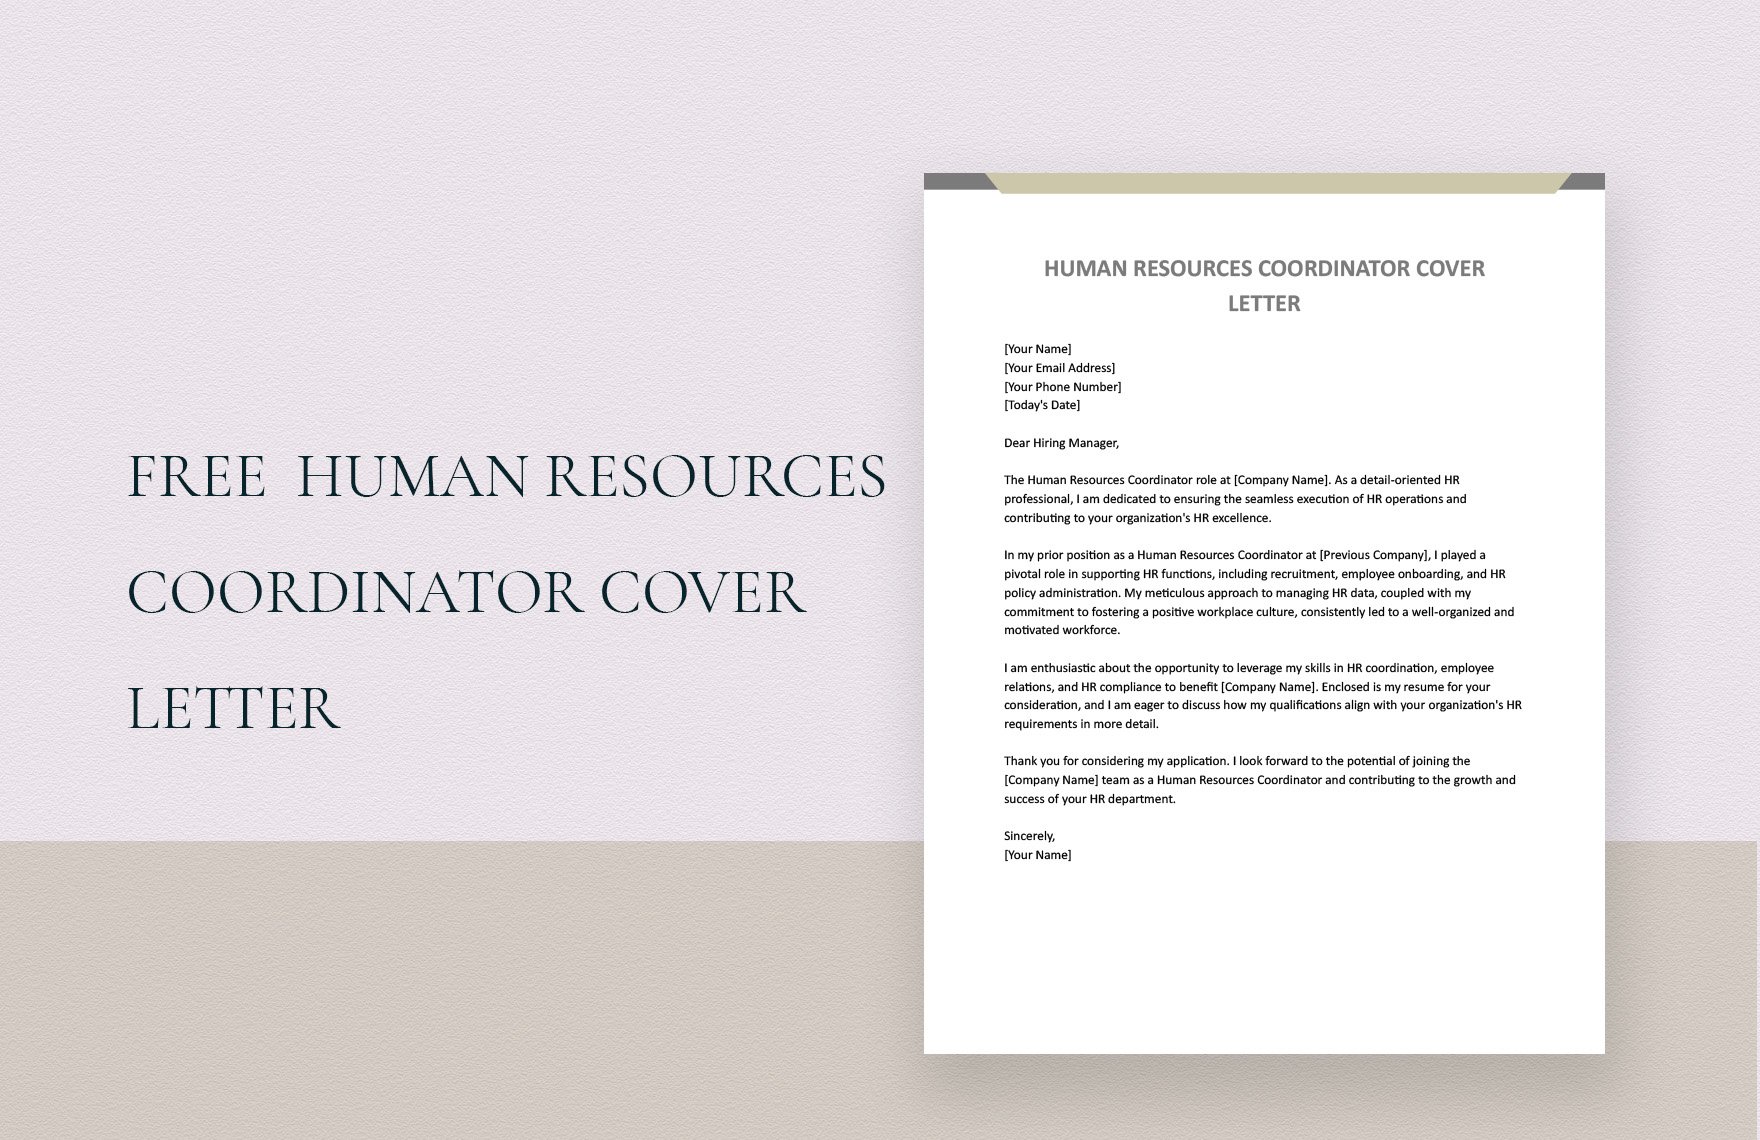 Human Resources Coordinator Cover Letter in Word, Google Docs